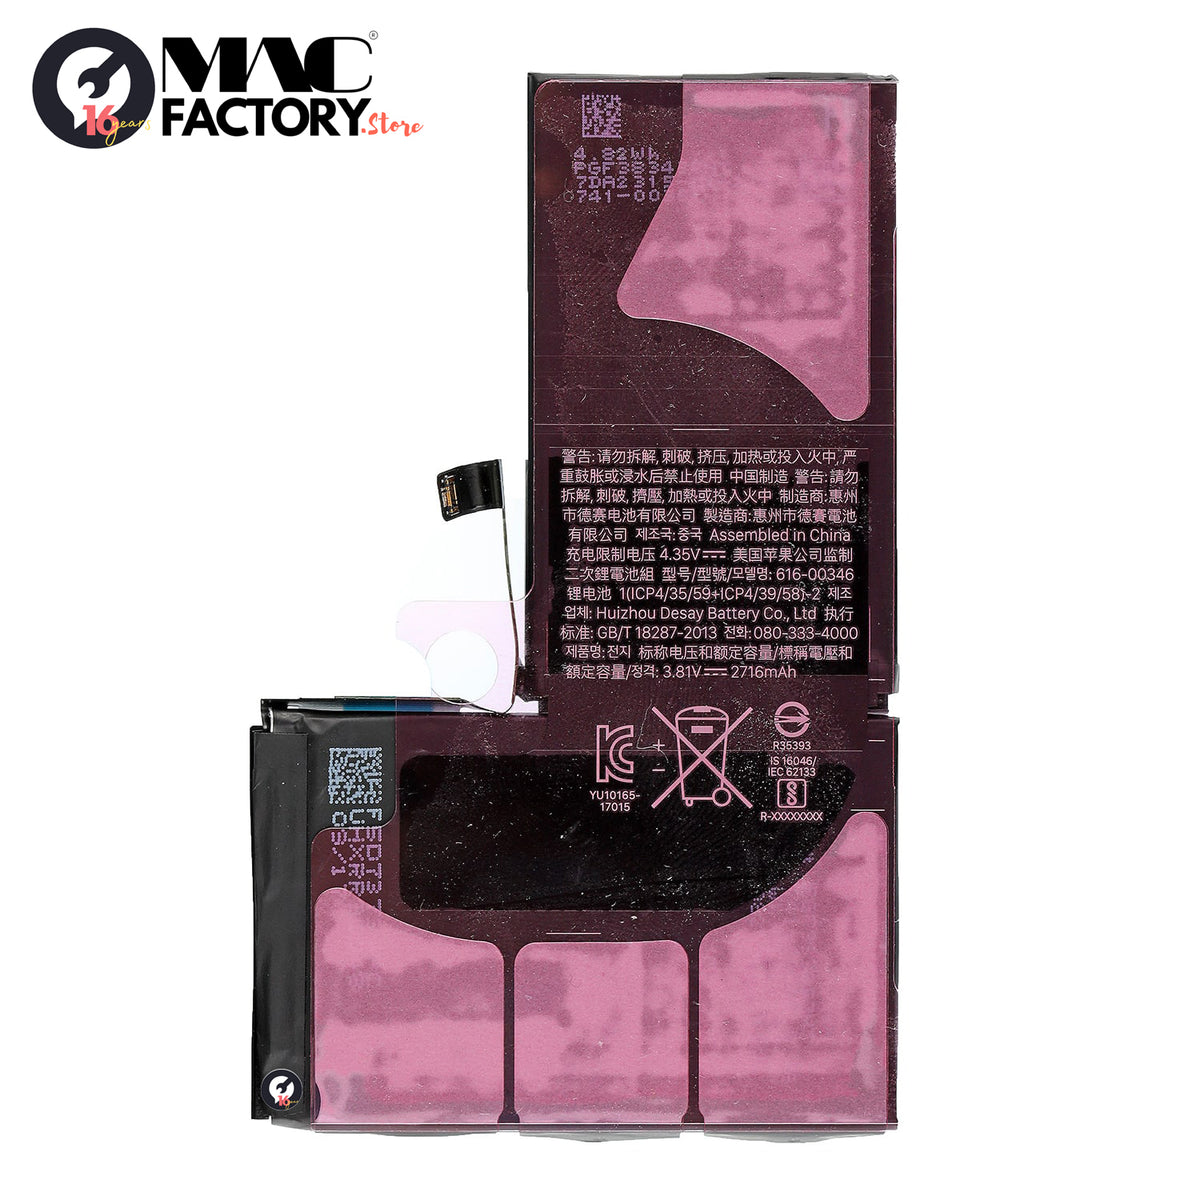 BATTERY 2716MAH FOR IPHONE X